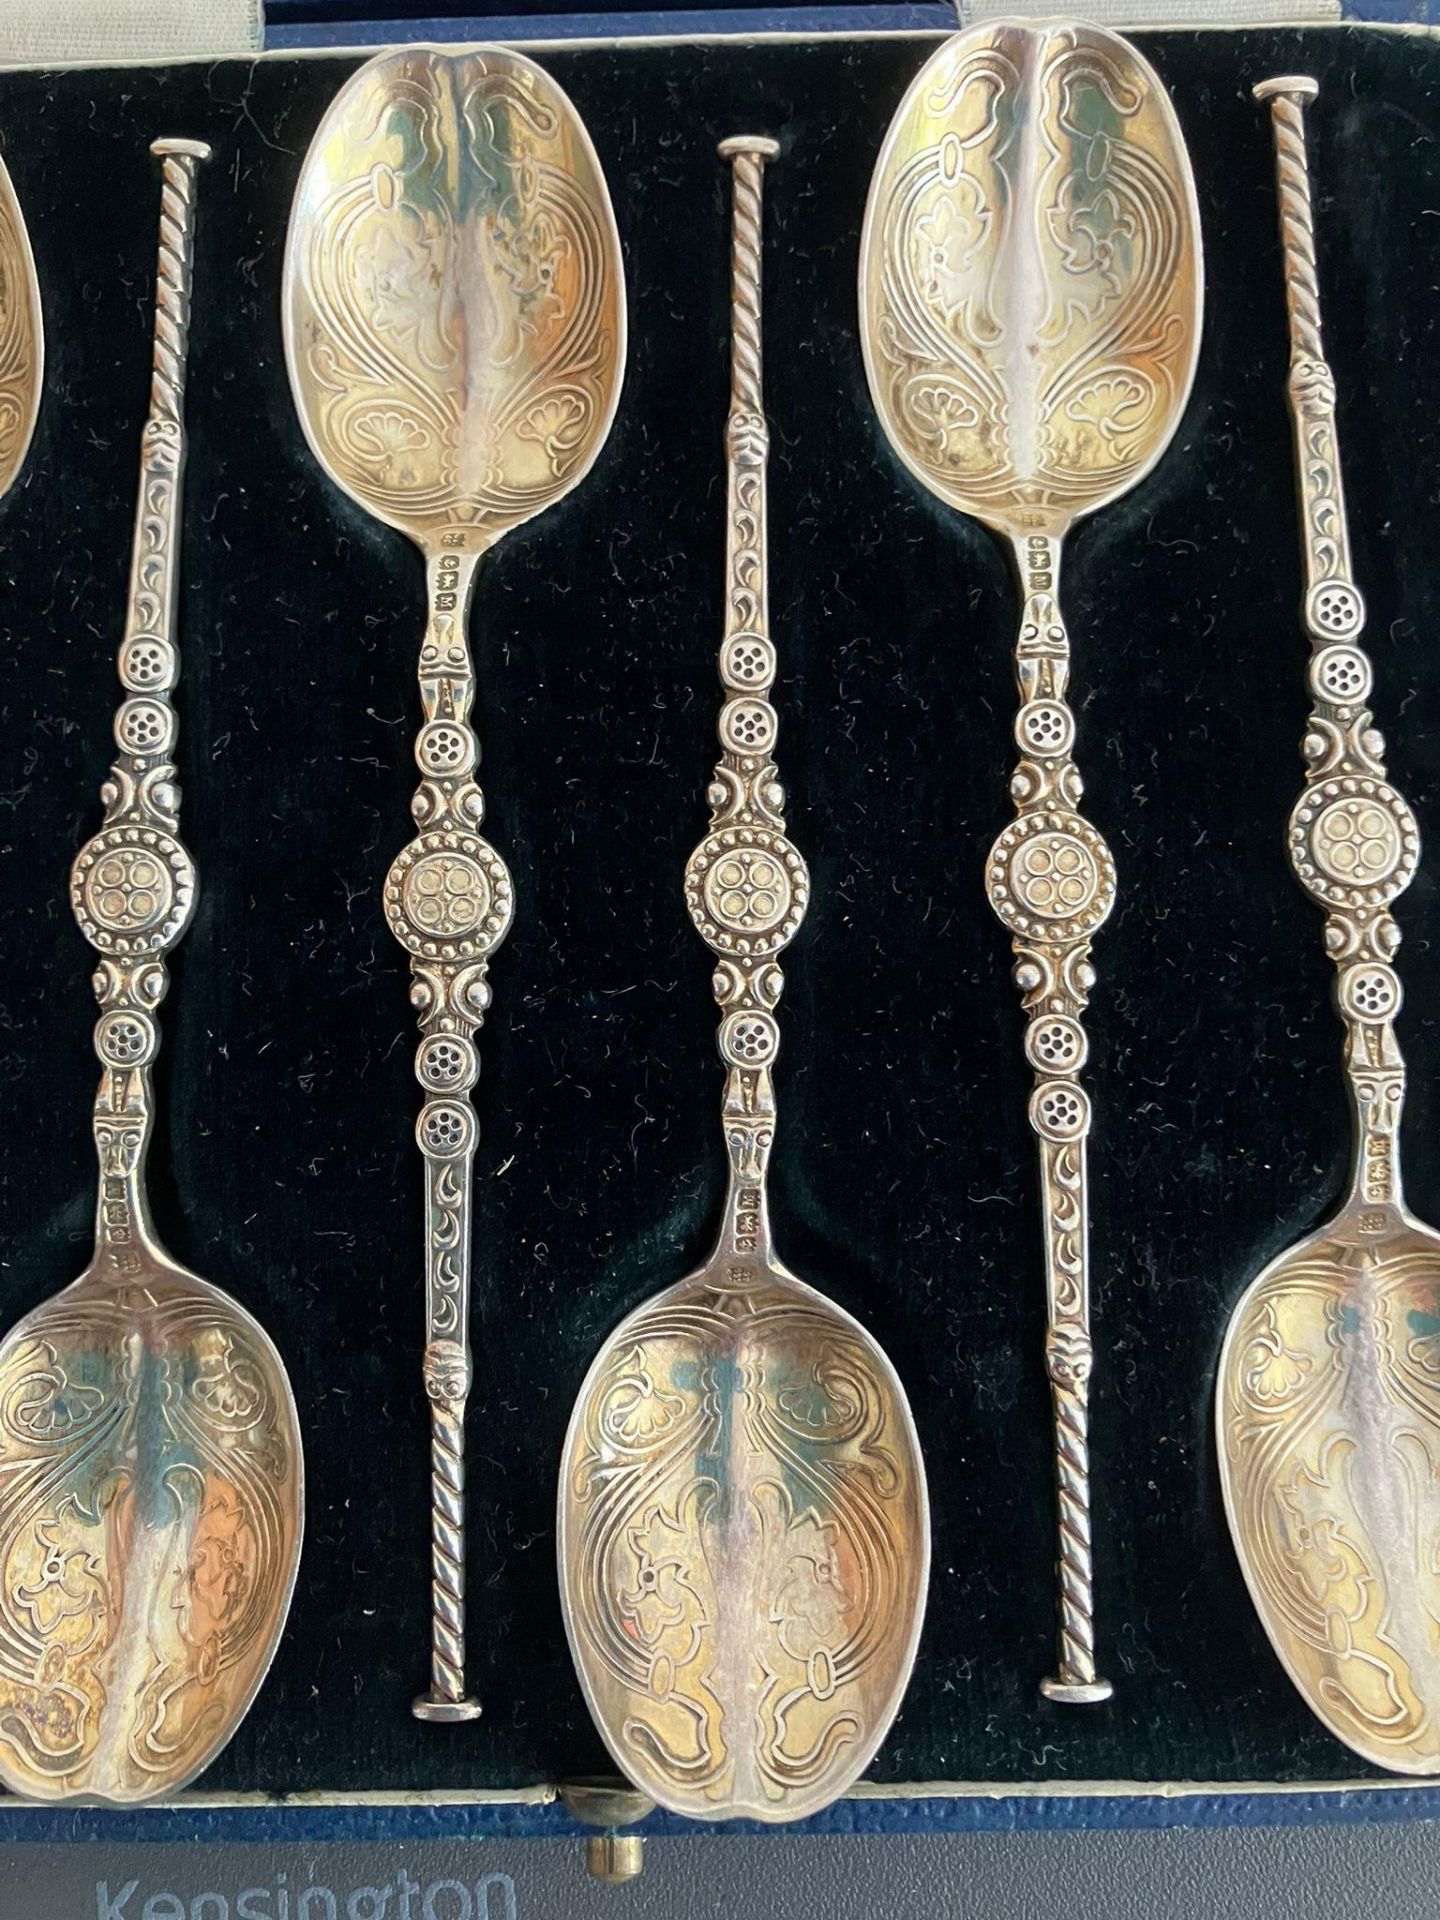 Rare Antique set of six gilded SILVER ANOINTING TEASPOONS. Clear hallmark for Charles S Green, - Image 3 of 5